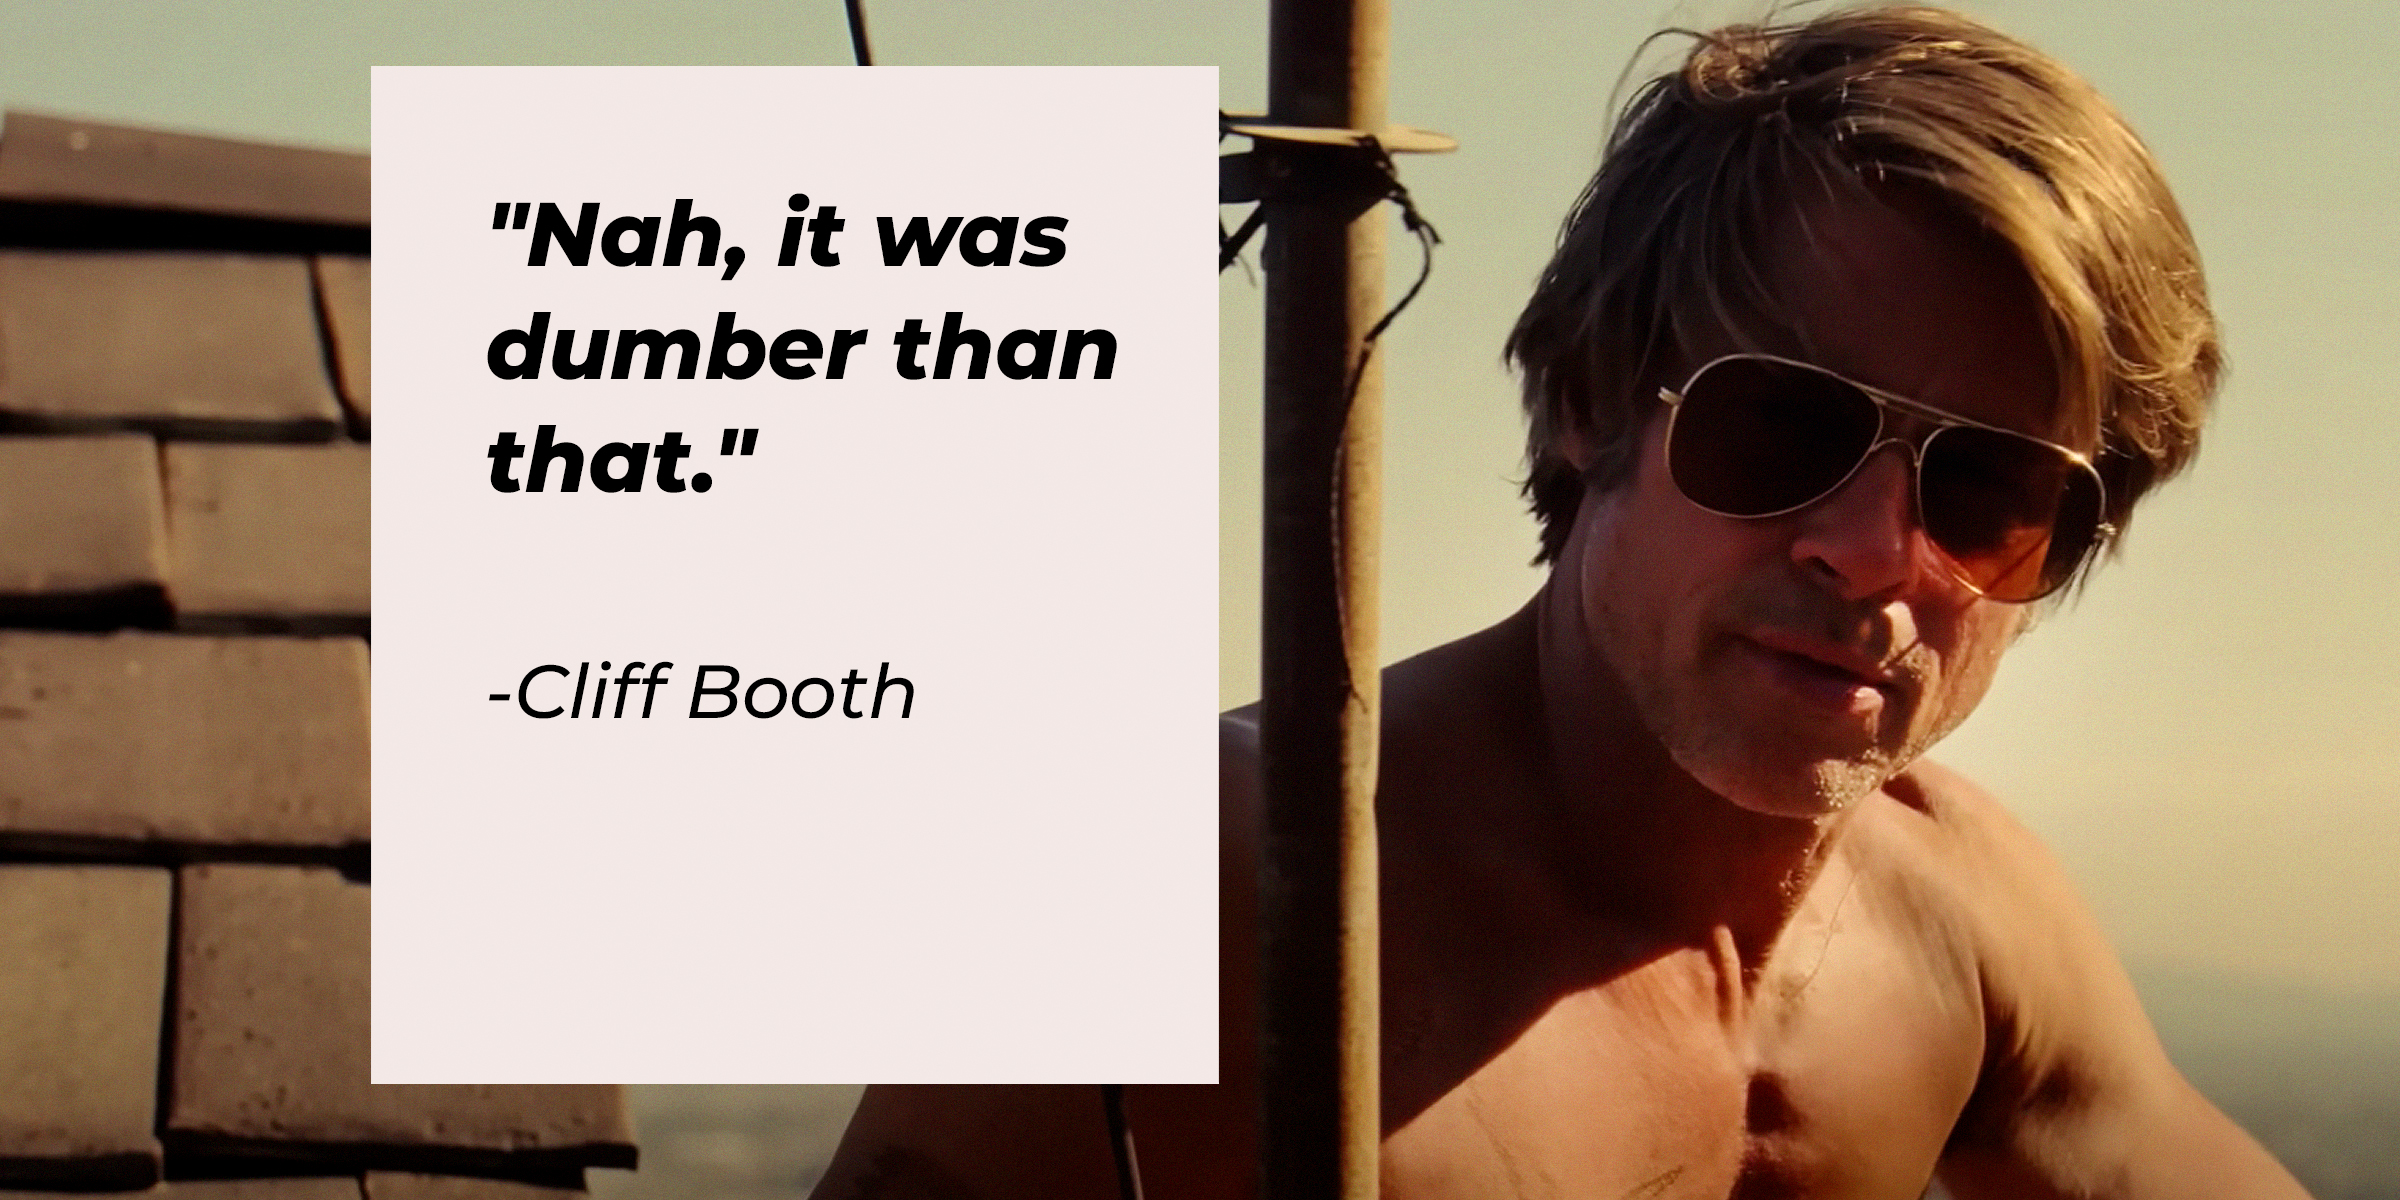 Cliff Booth with His Quote, "Nah, It Was Dumber than That." | Source: Facebook/OnceInHollywood